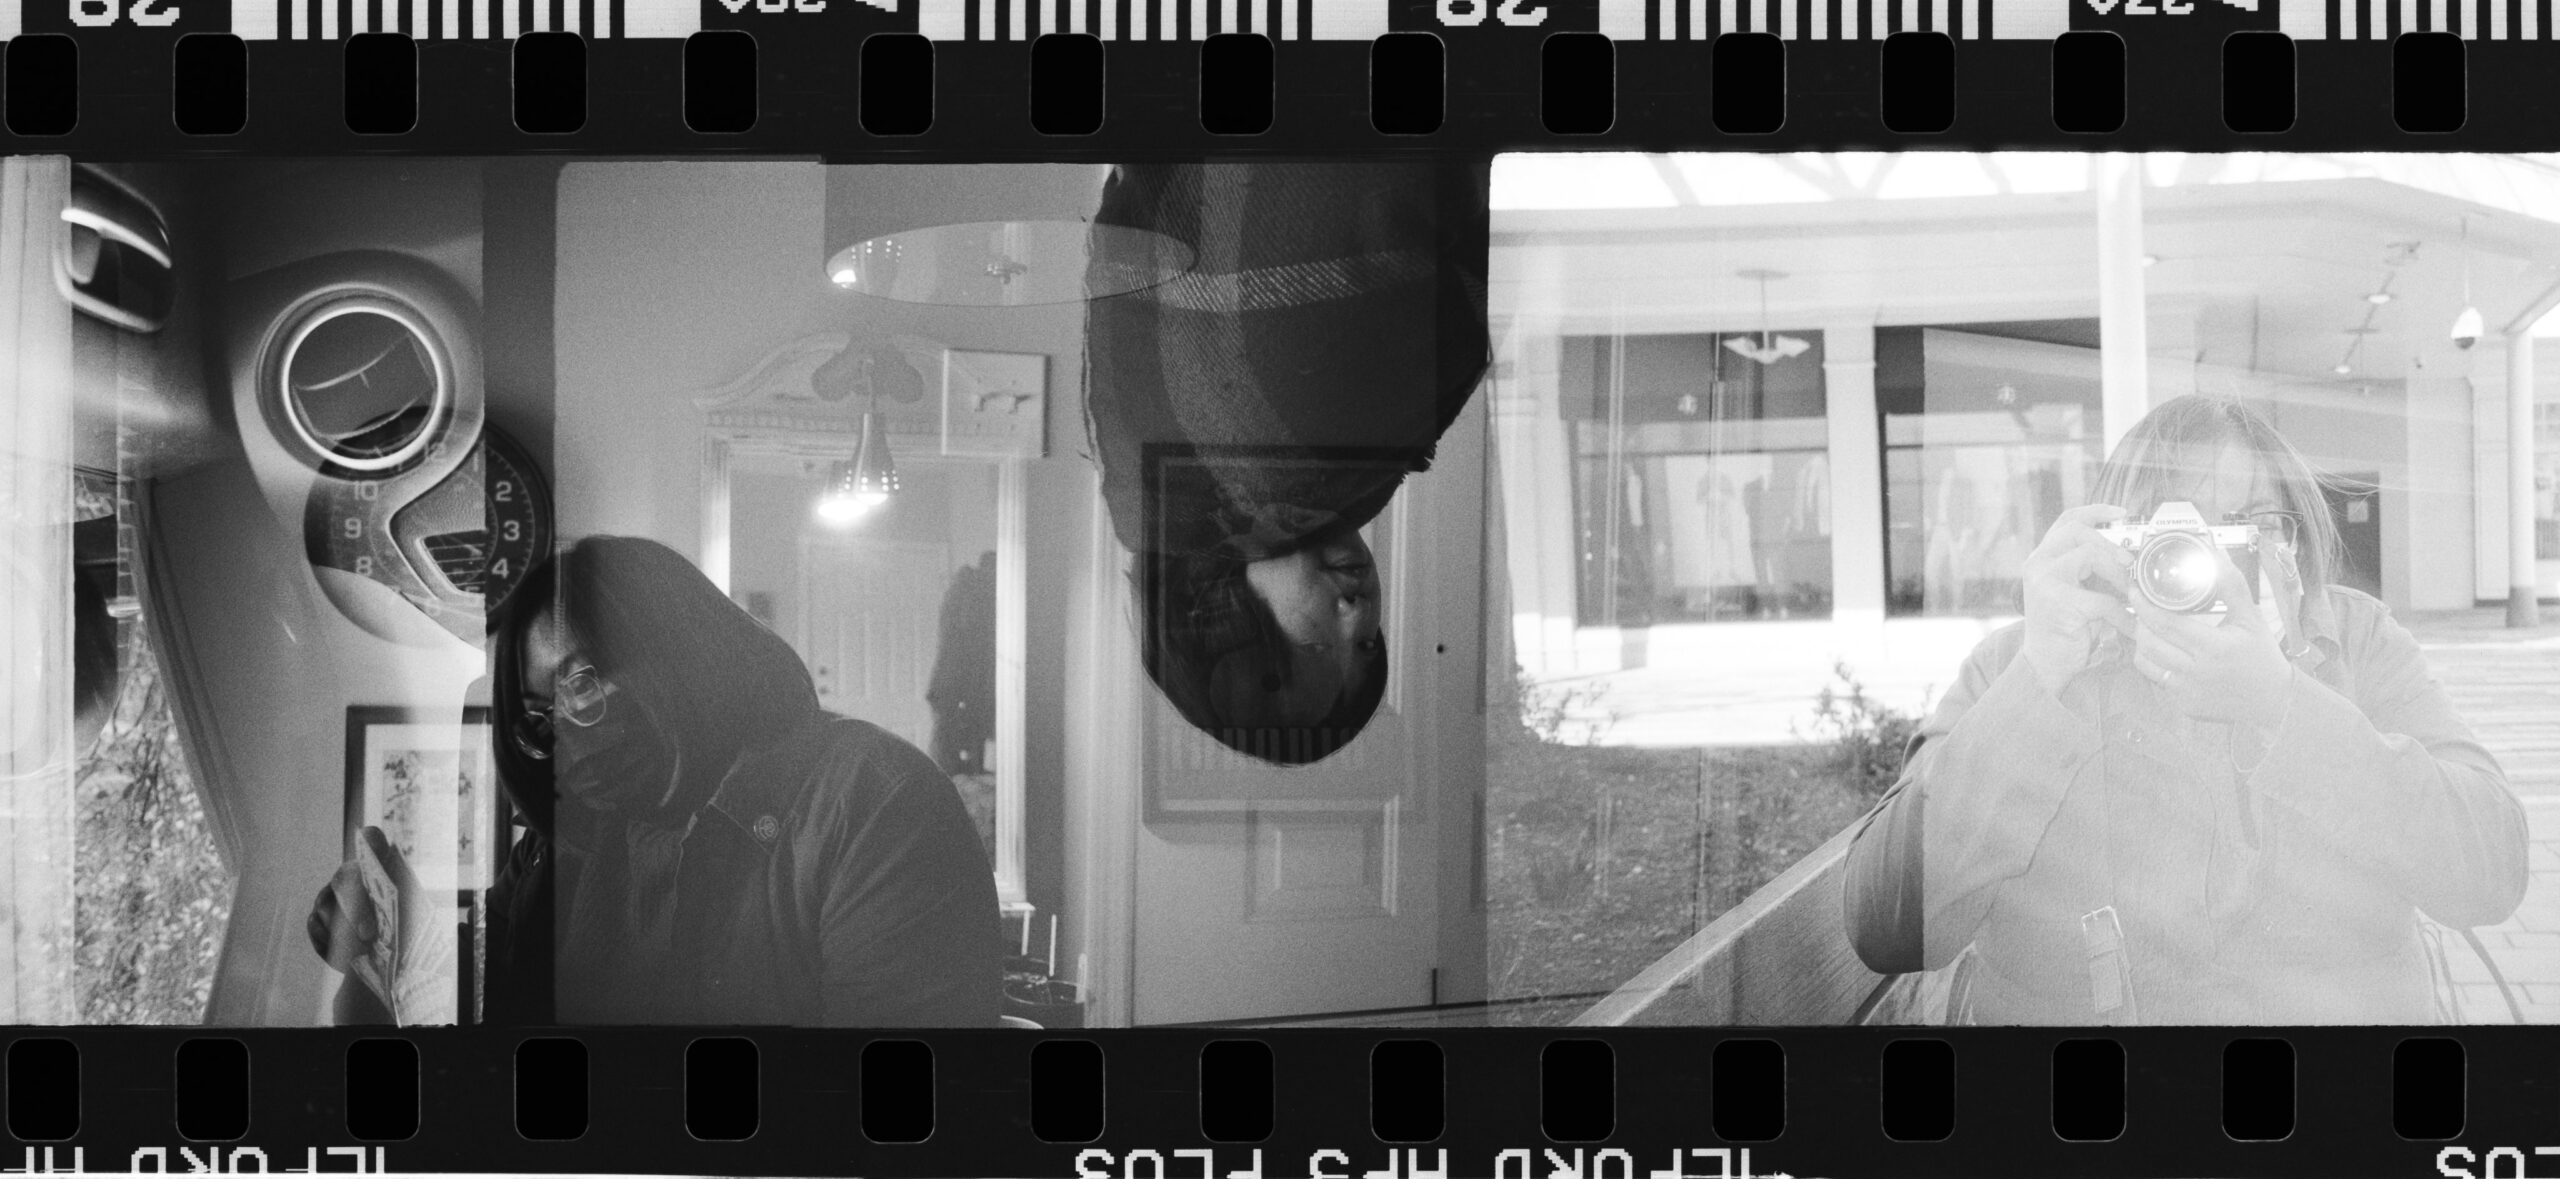 @PapaShittyCams Replying to @ILFORDPhoto I did a double exposure roll of Ilford HP5 Plus using two different cameras & got this triptych of @SammishSquare . #ilfordphoto #fridayfavourites #unexpected